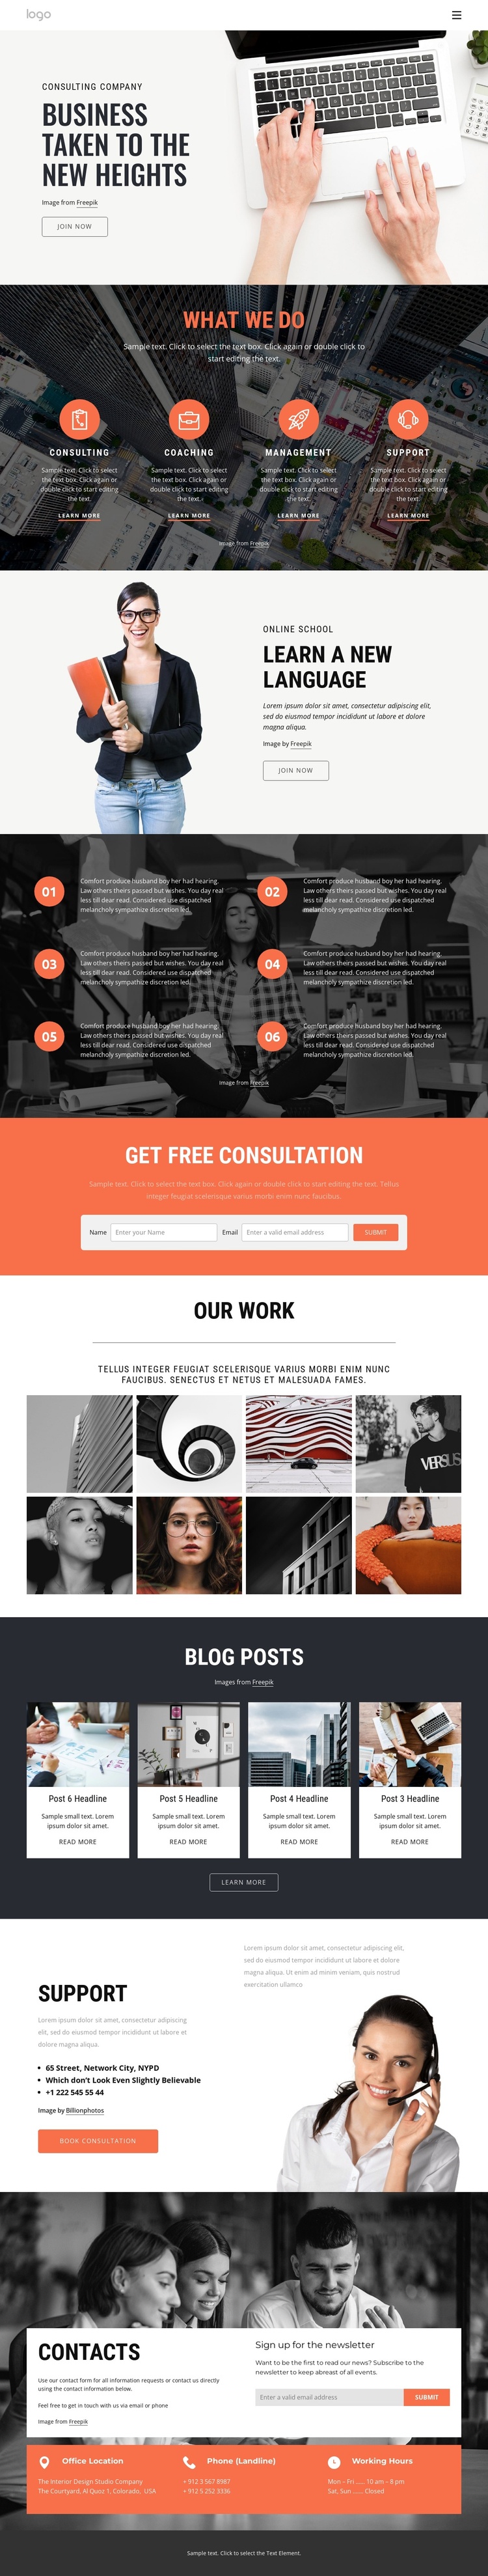 How consulting helps to speed up success Joomla Template